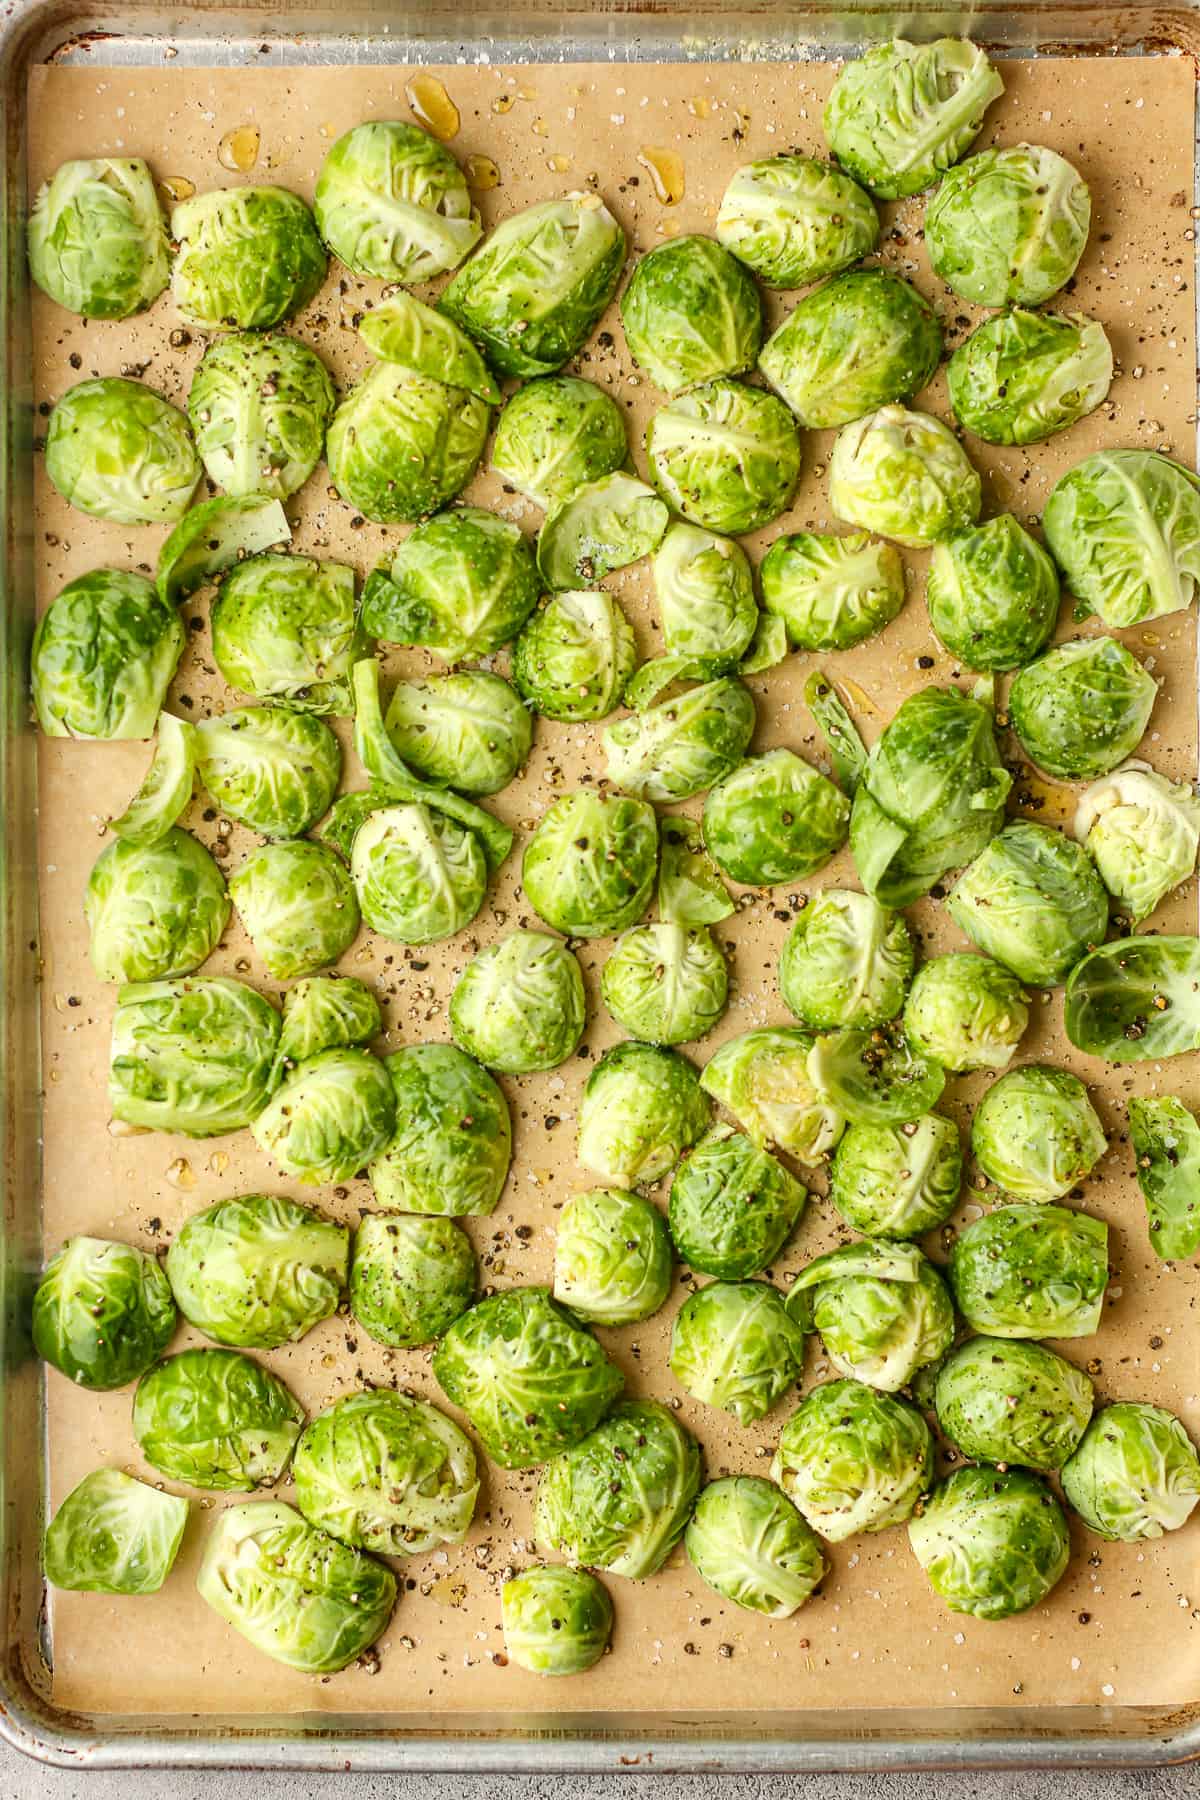 A pan of halved brussels sprouts with olive oil, salt, and pepper.